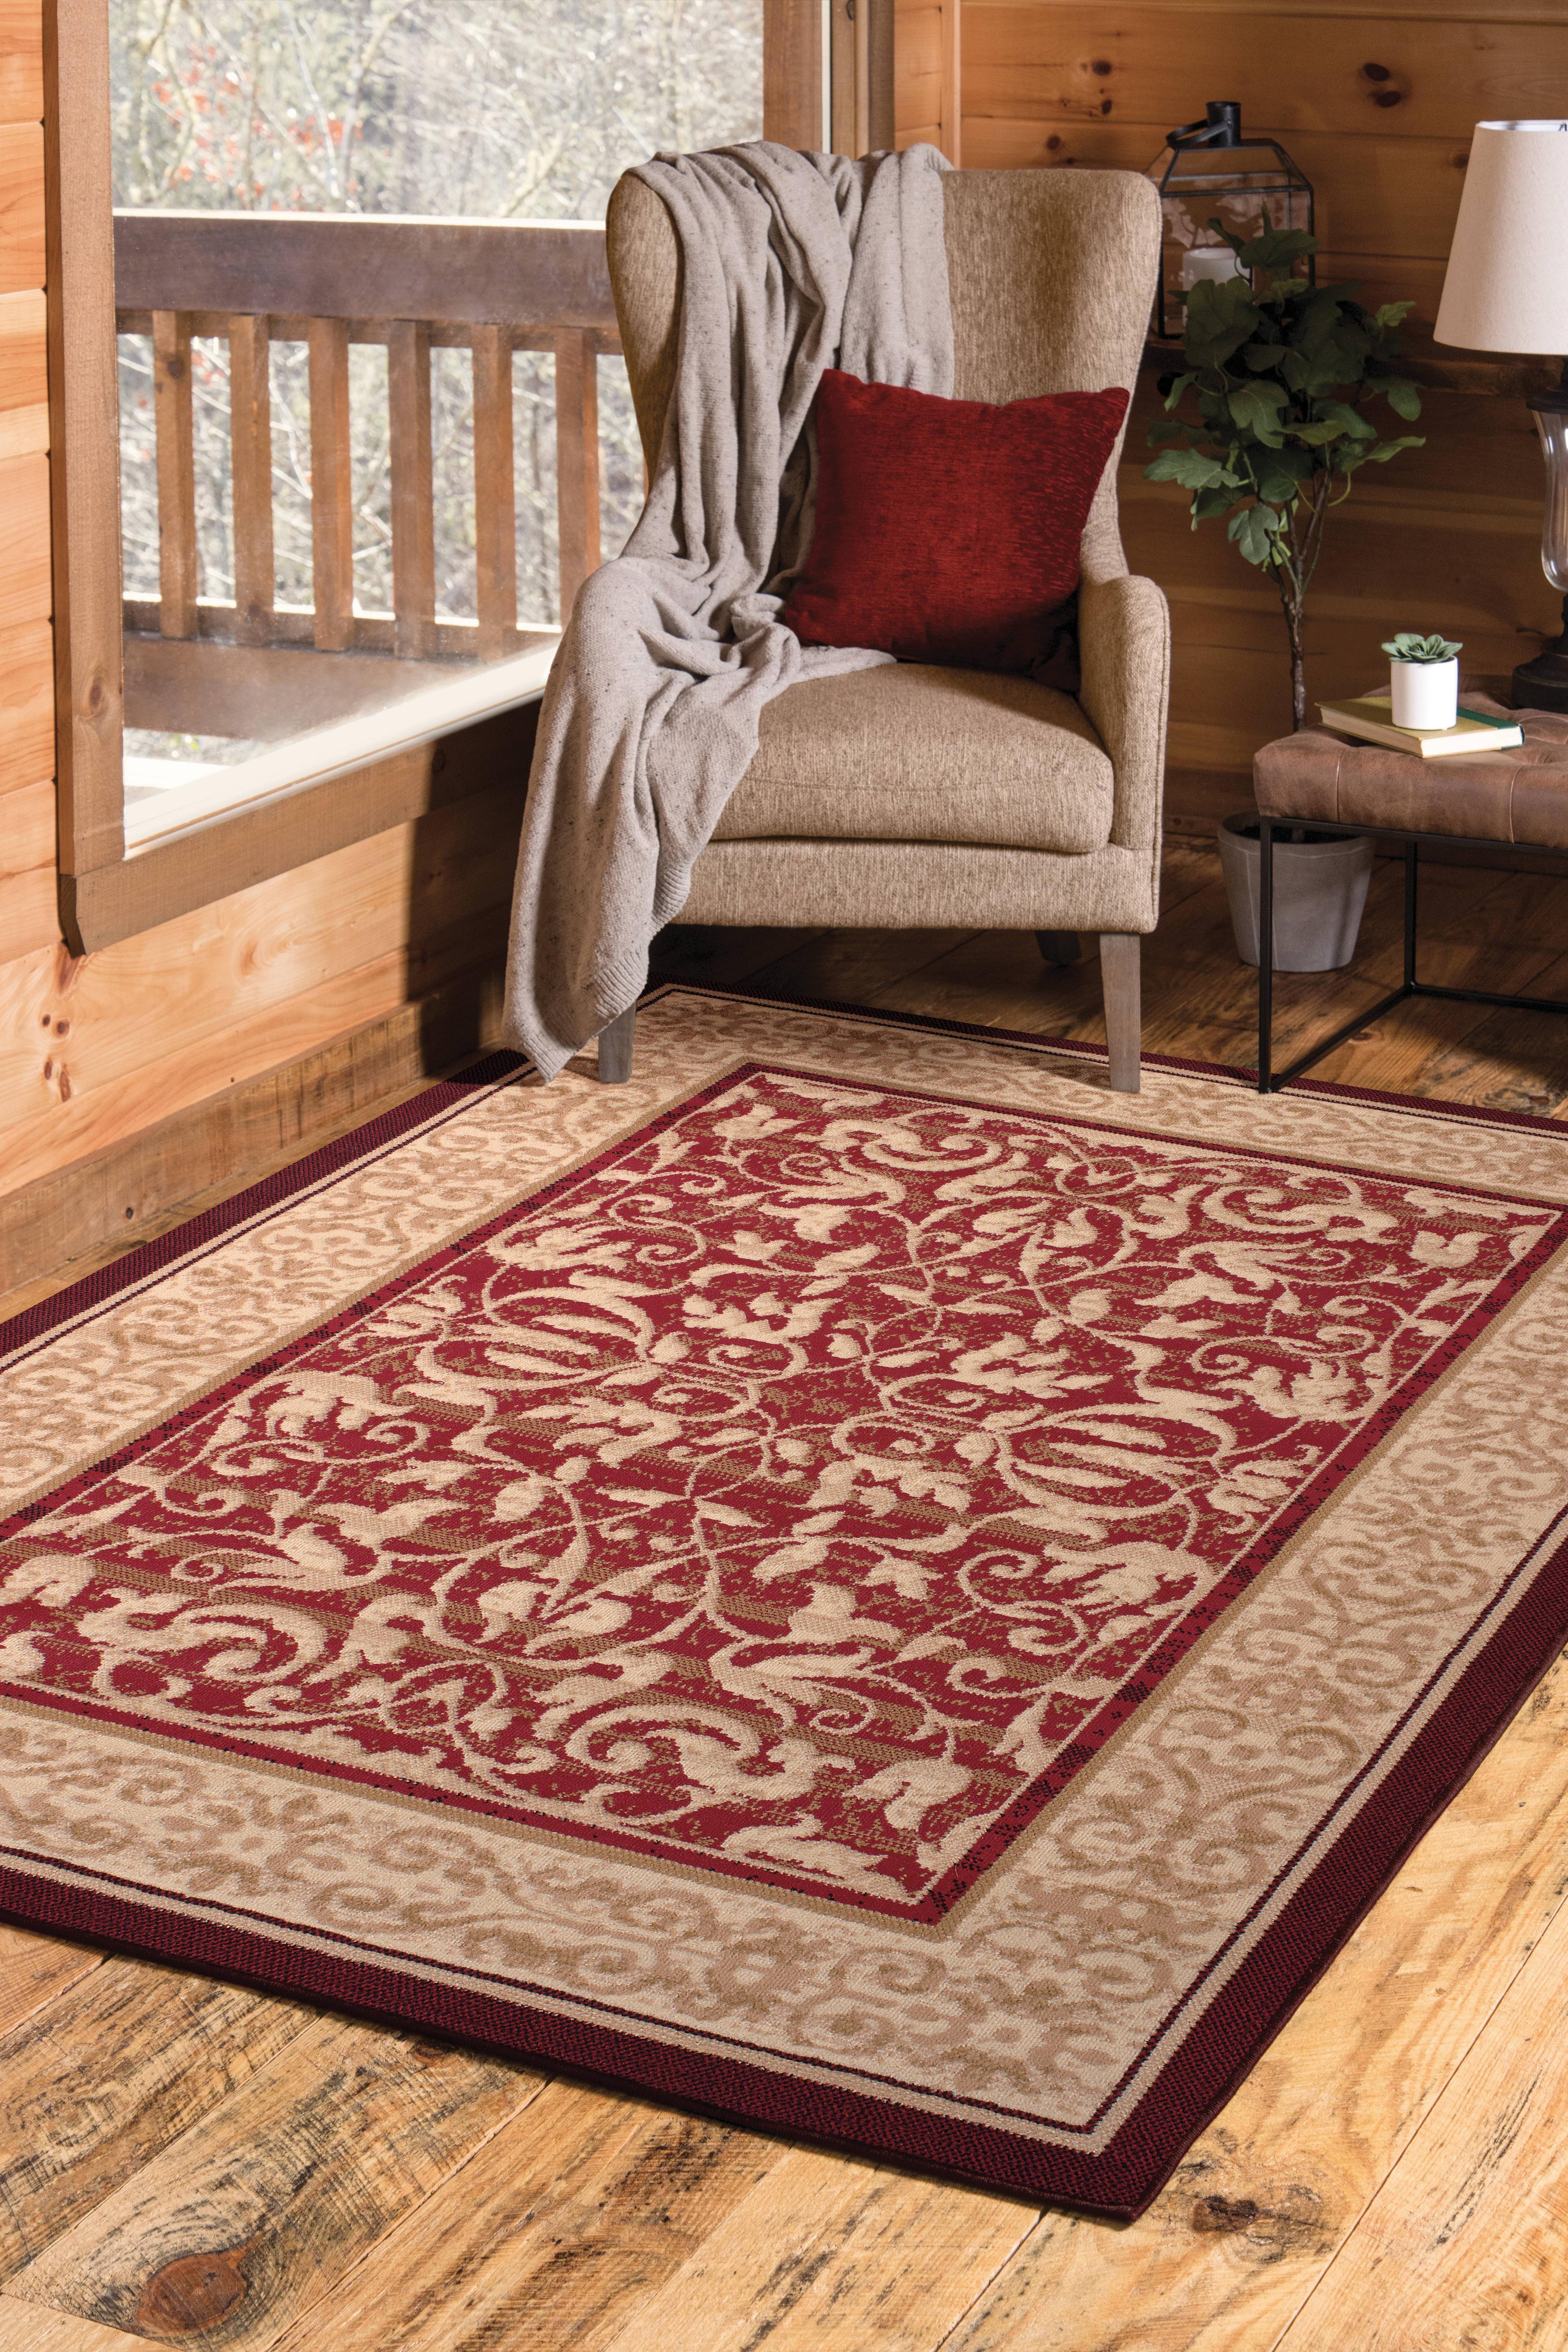 United Weavers Plaza Genevieve Accent Rug, Bordered Pattern, Red, 1'11" X 3'3" - image 1 of 6